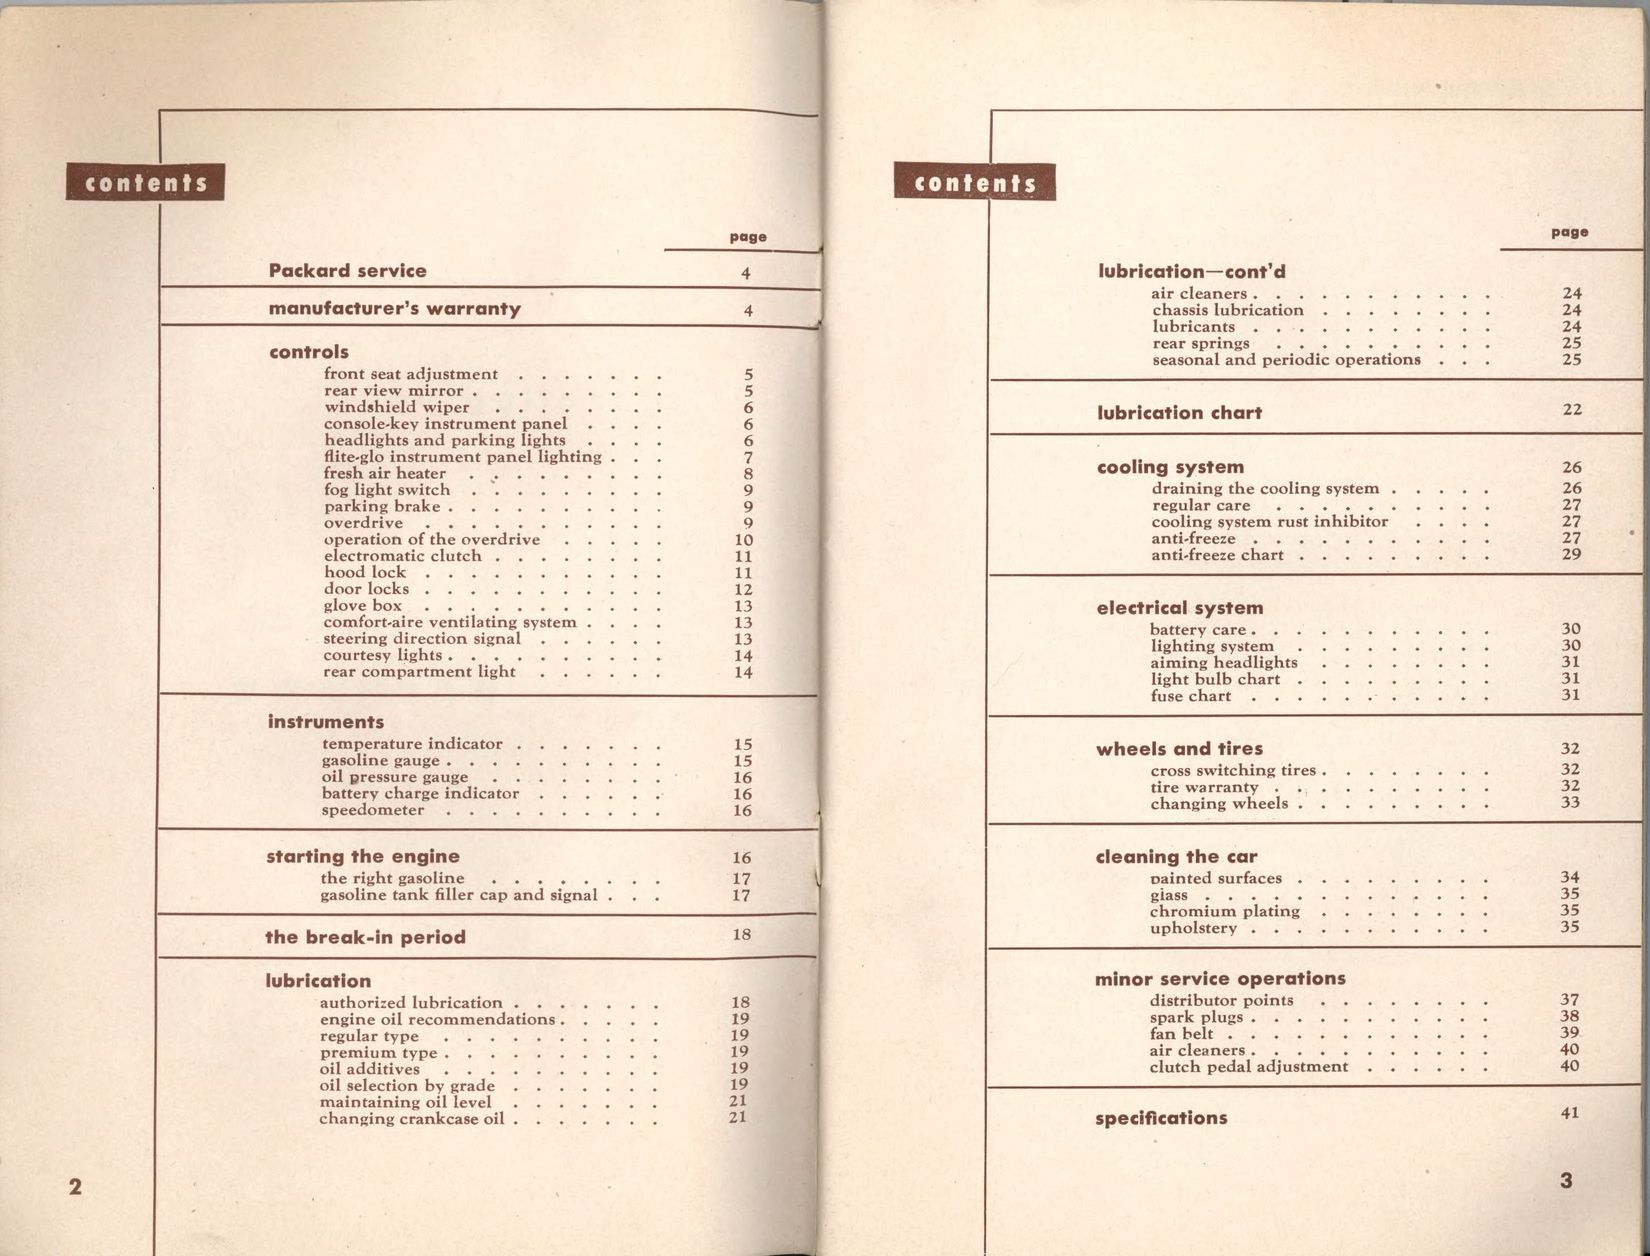 1948 Packard Owners Manual Page 1